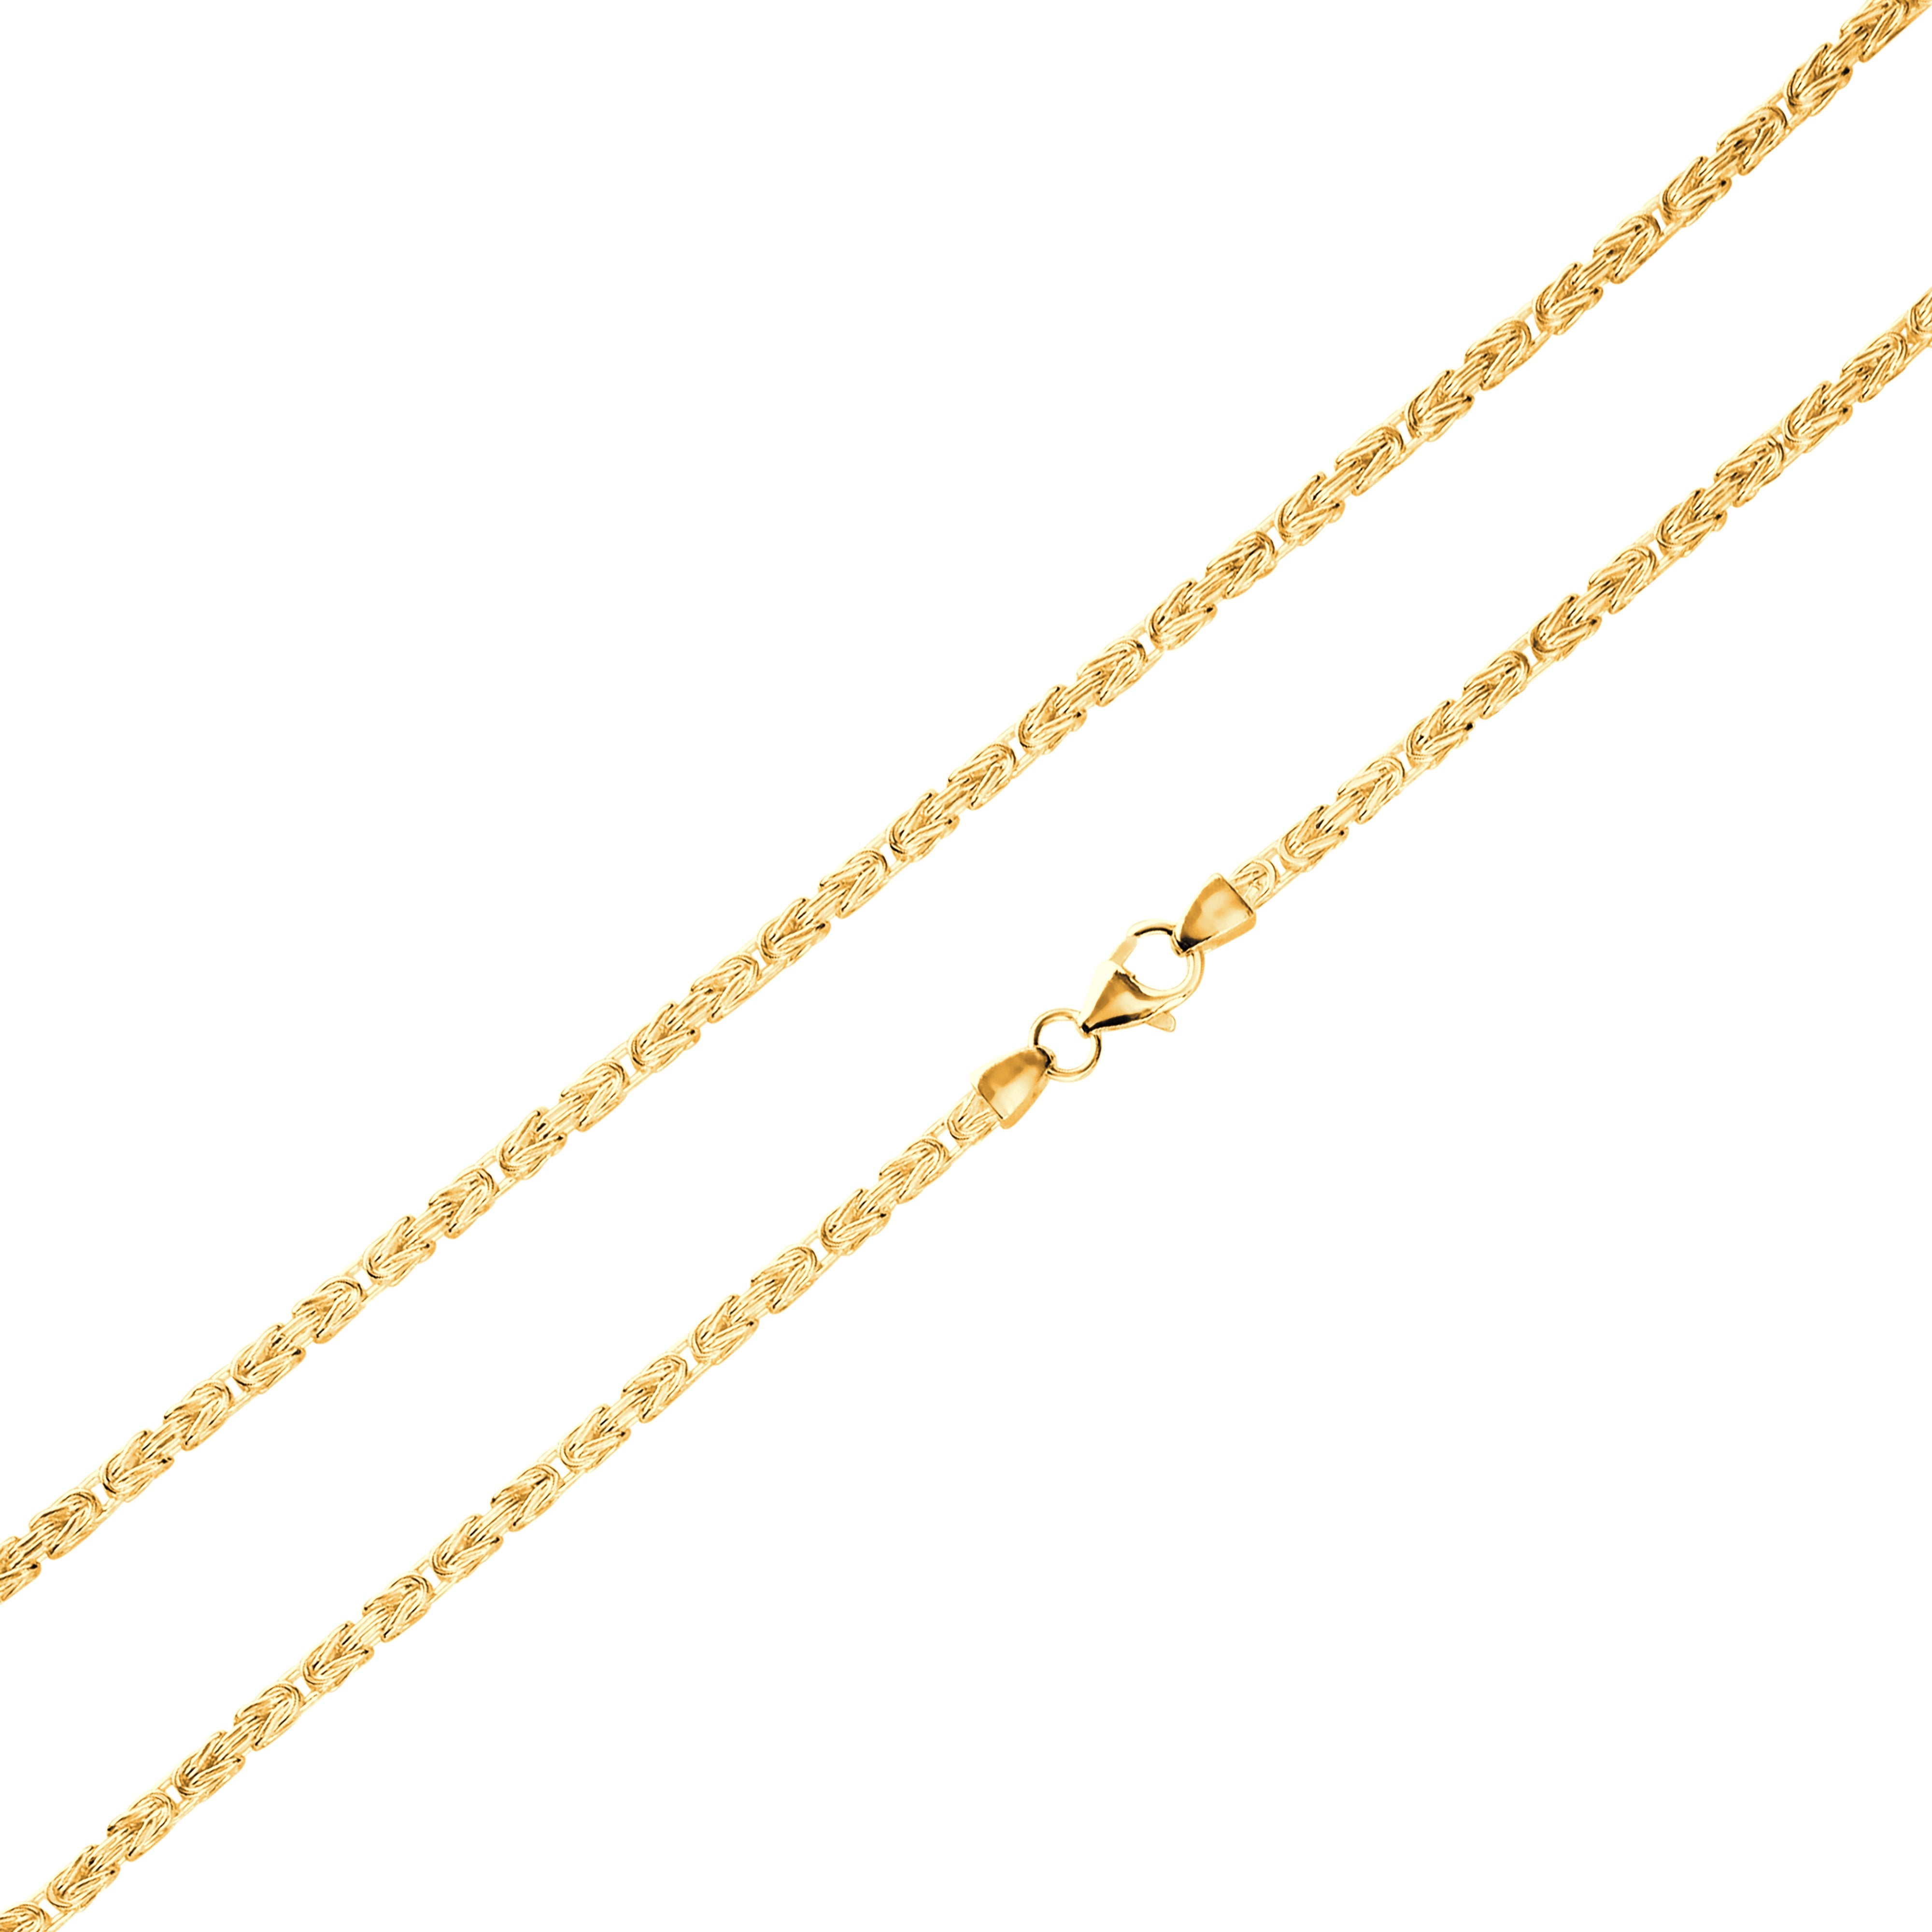 Byzantine chain 3.3mm wide - 585 gold - solid